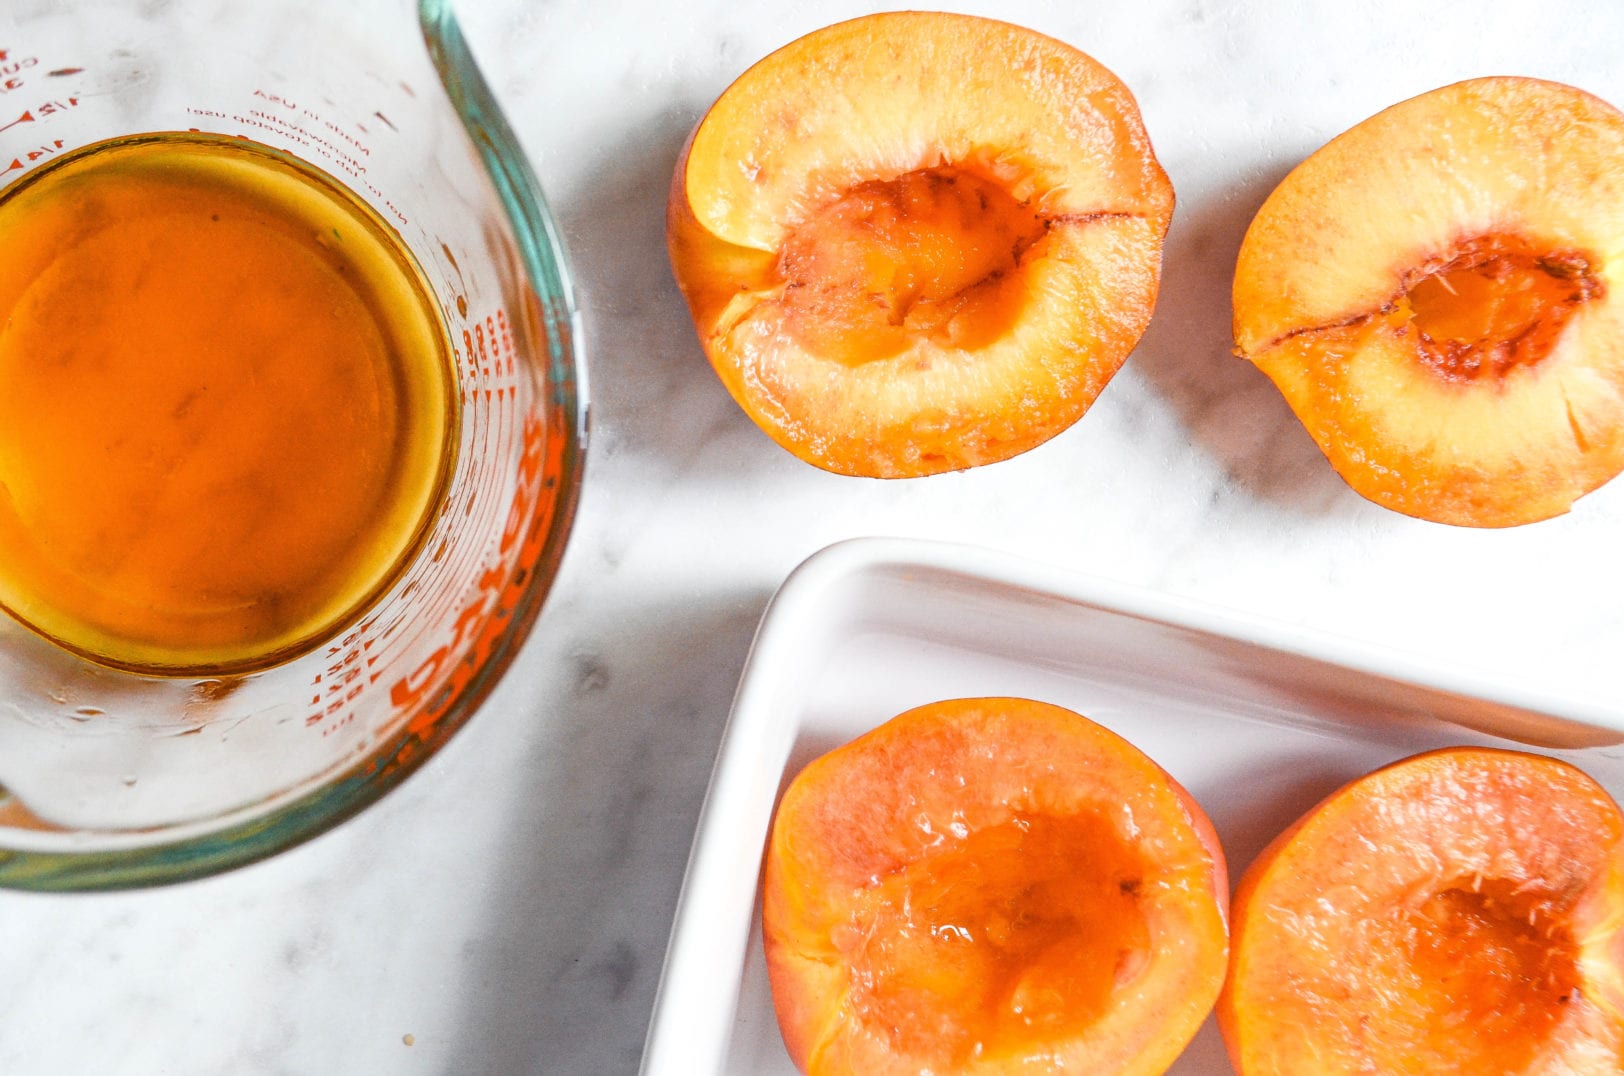 Baked Bourbon Soaked Nectarines With Brûléed Sugar